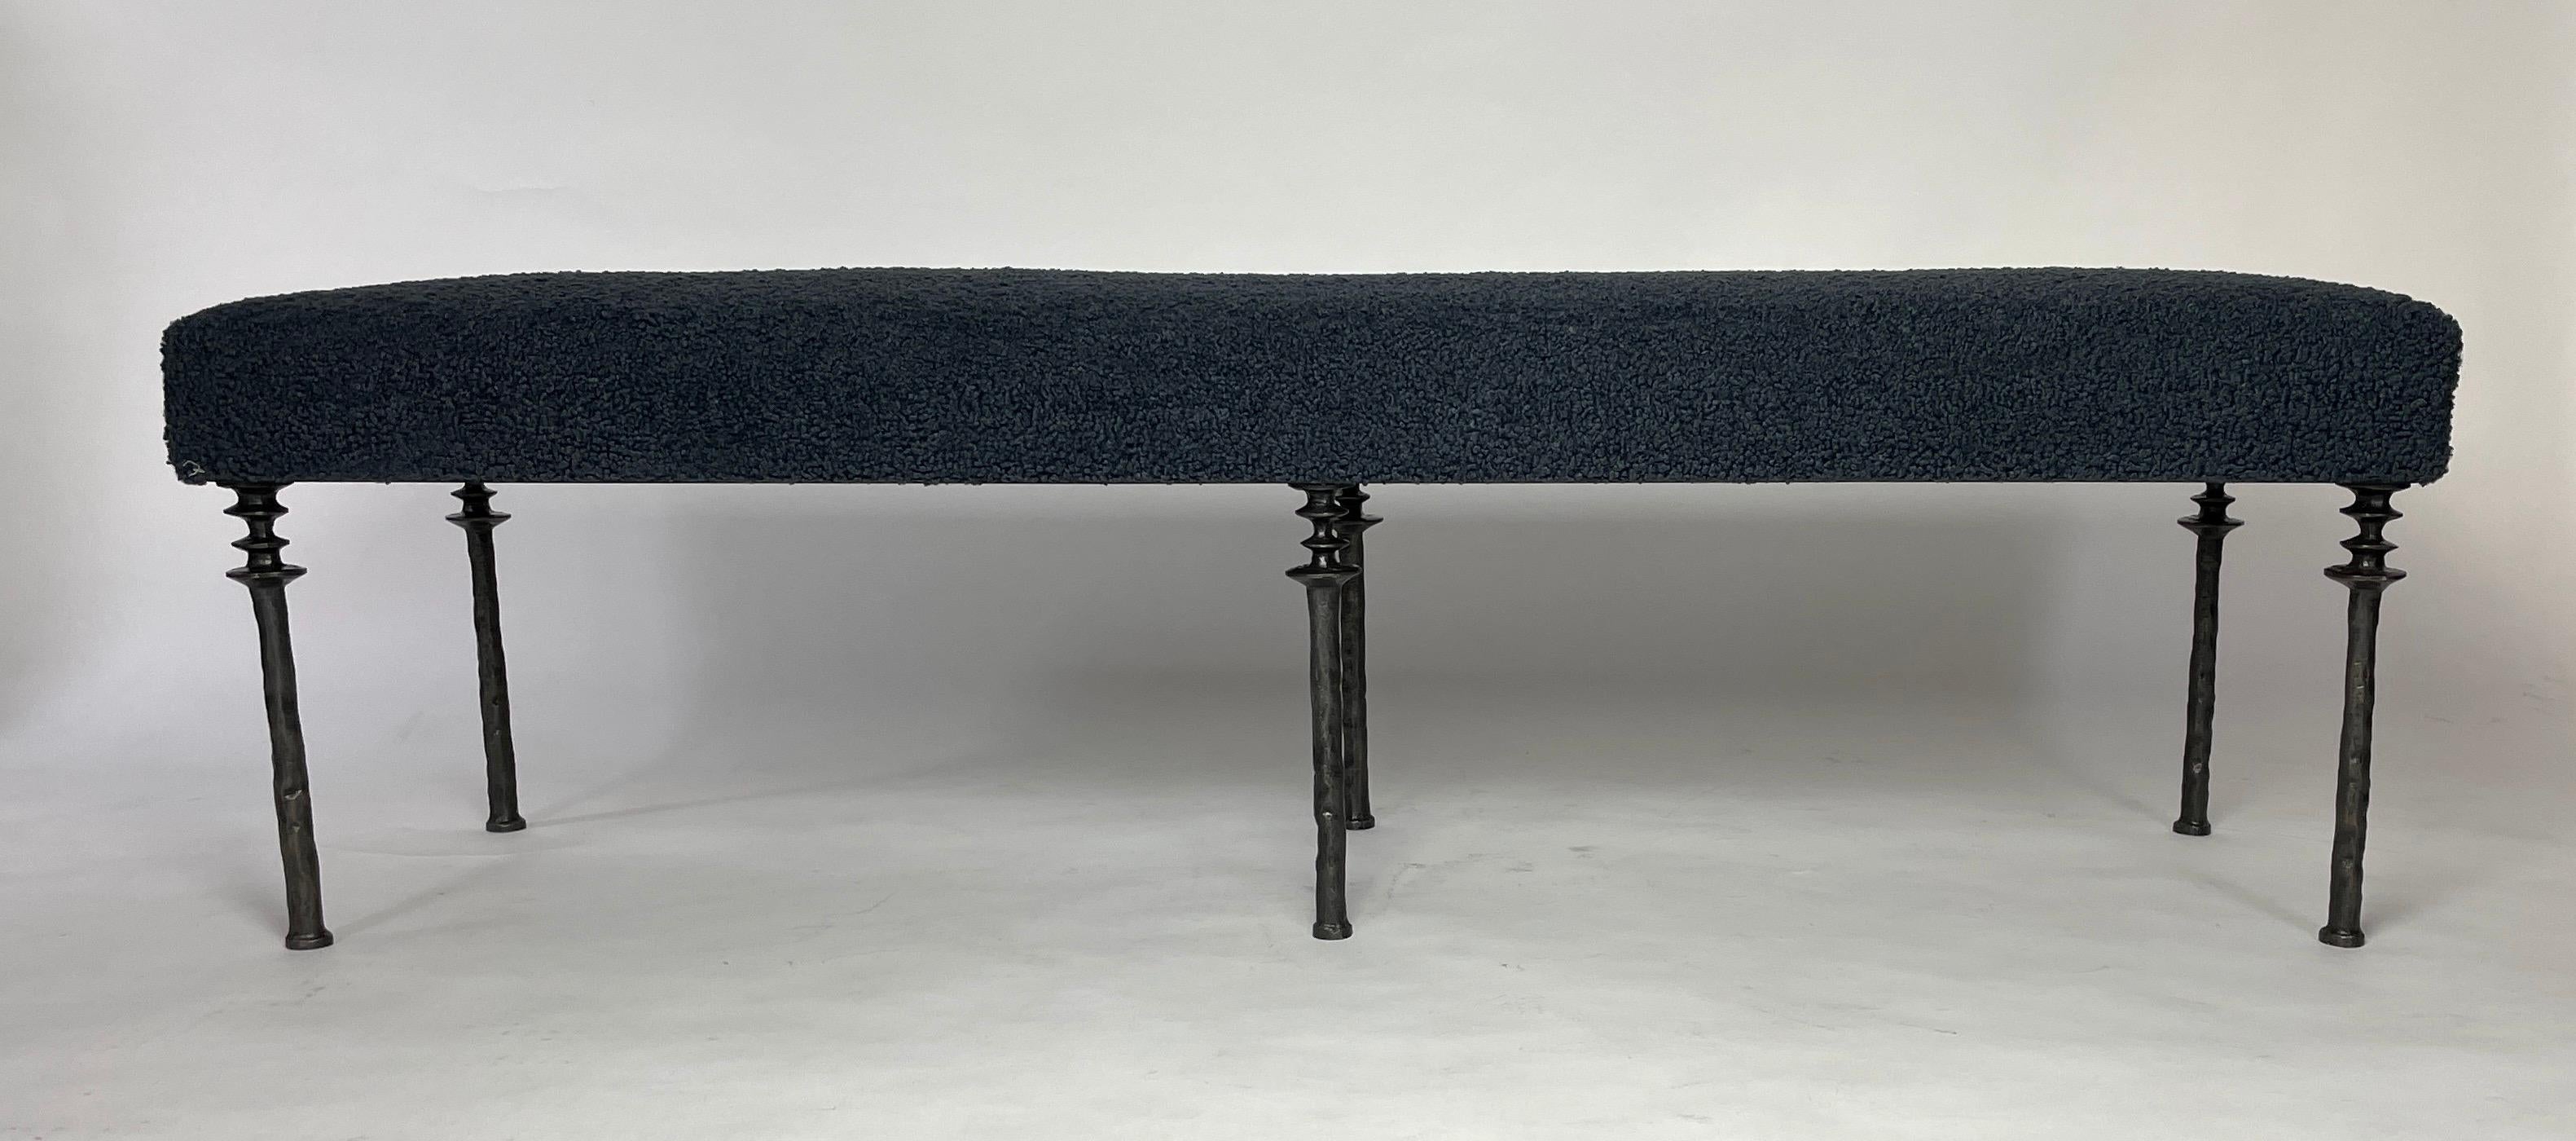 Inspired by Diego Giacometti, this bench is ideal for those who are looking for unique seating. Their cast bronze legs provide a truly organic touch. The cushion has been upholstered in a twilight blue boucle fabric. The seat can be upholstered in a